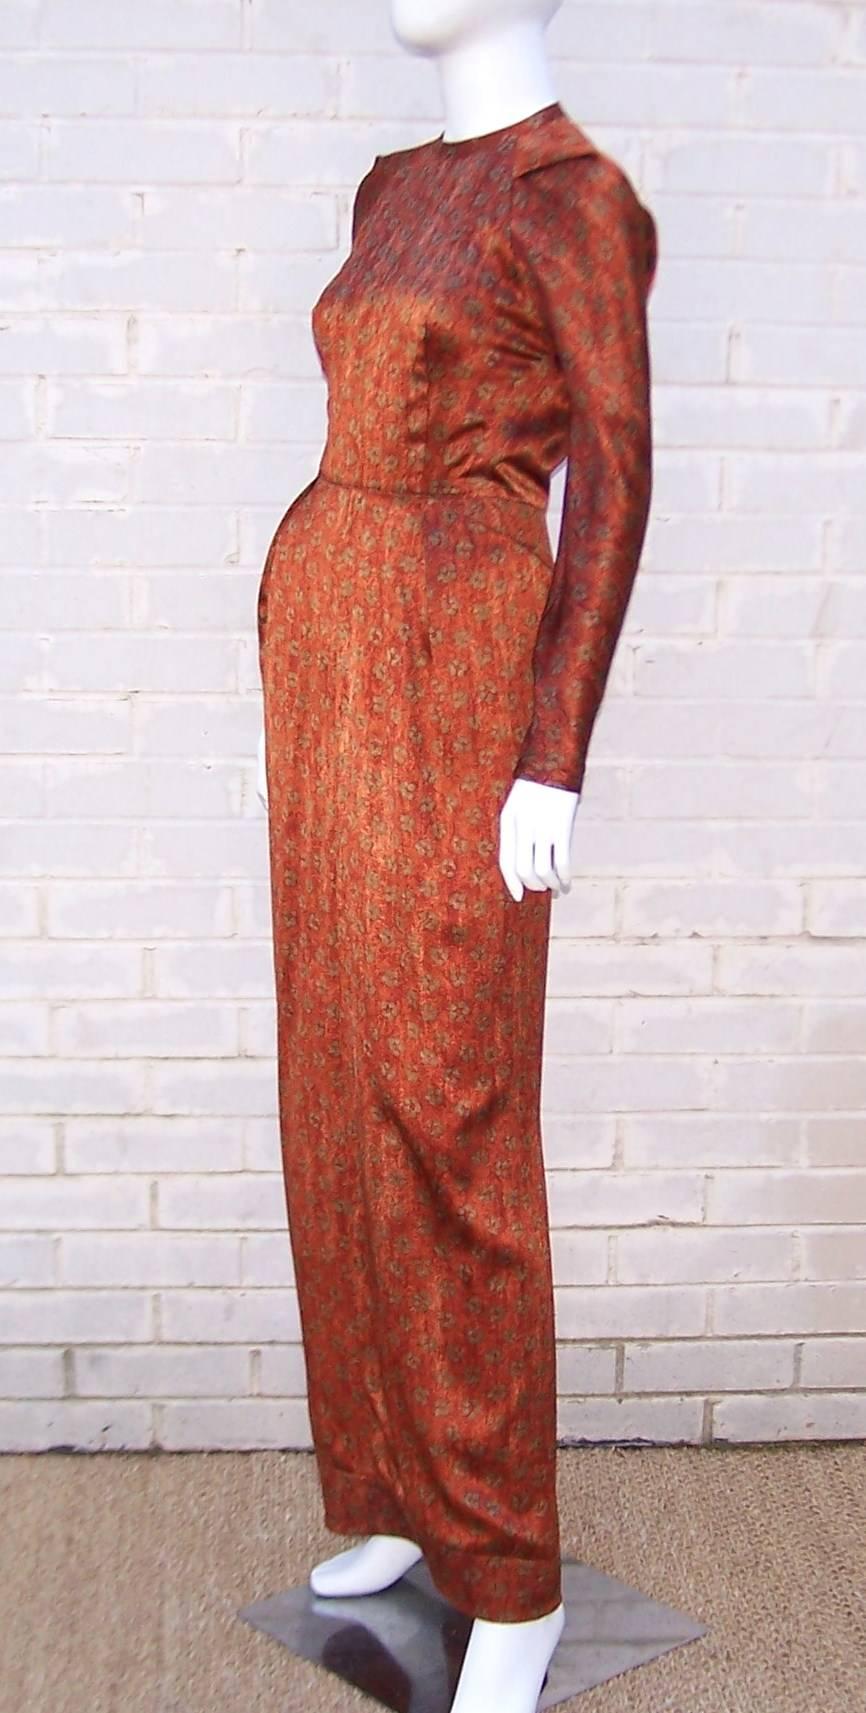 Now this dress is one tall drink of water!  Start with the gorgeous silk fabric in a coppery mottled brown with an abstract olive green floral print and continue with structural details from the shoulder to hem for an eyeful of elegance.  The dress